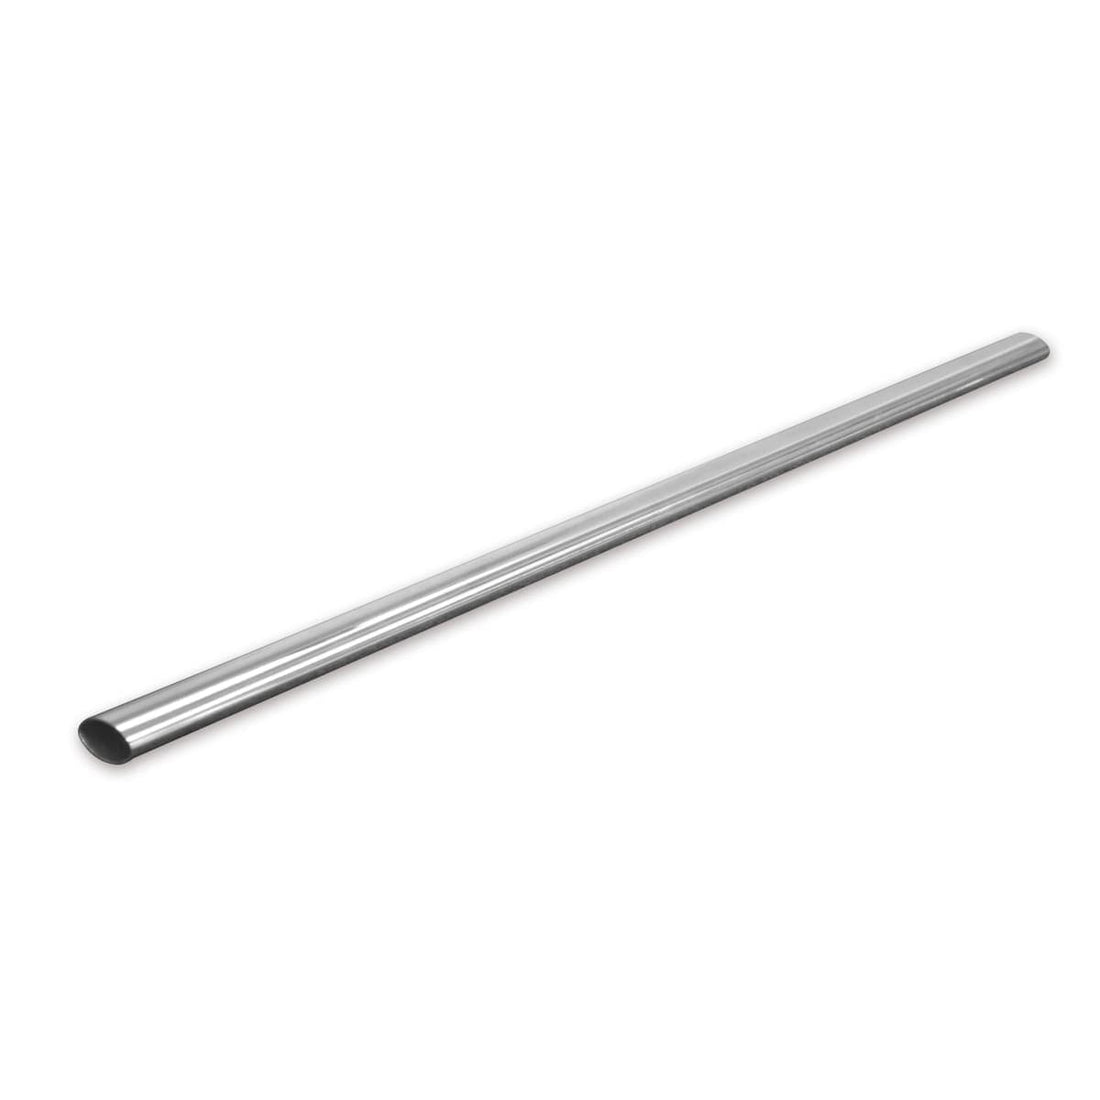 OVAL CUPBOARD TUBE 35X20MM L 80 CM CHROME SPACEO - best price from Maltashopper.com BR410510229